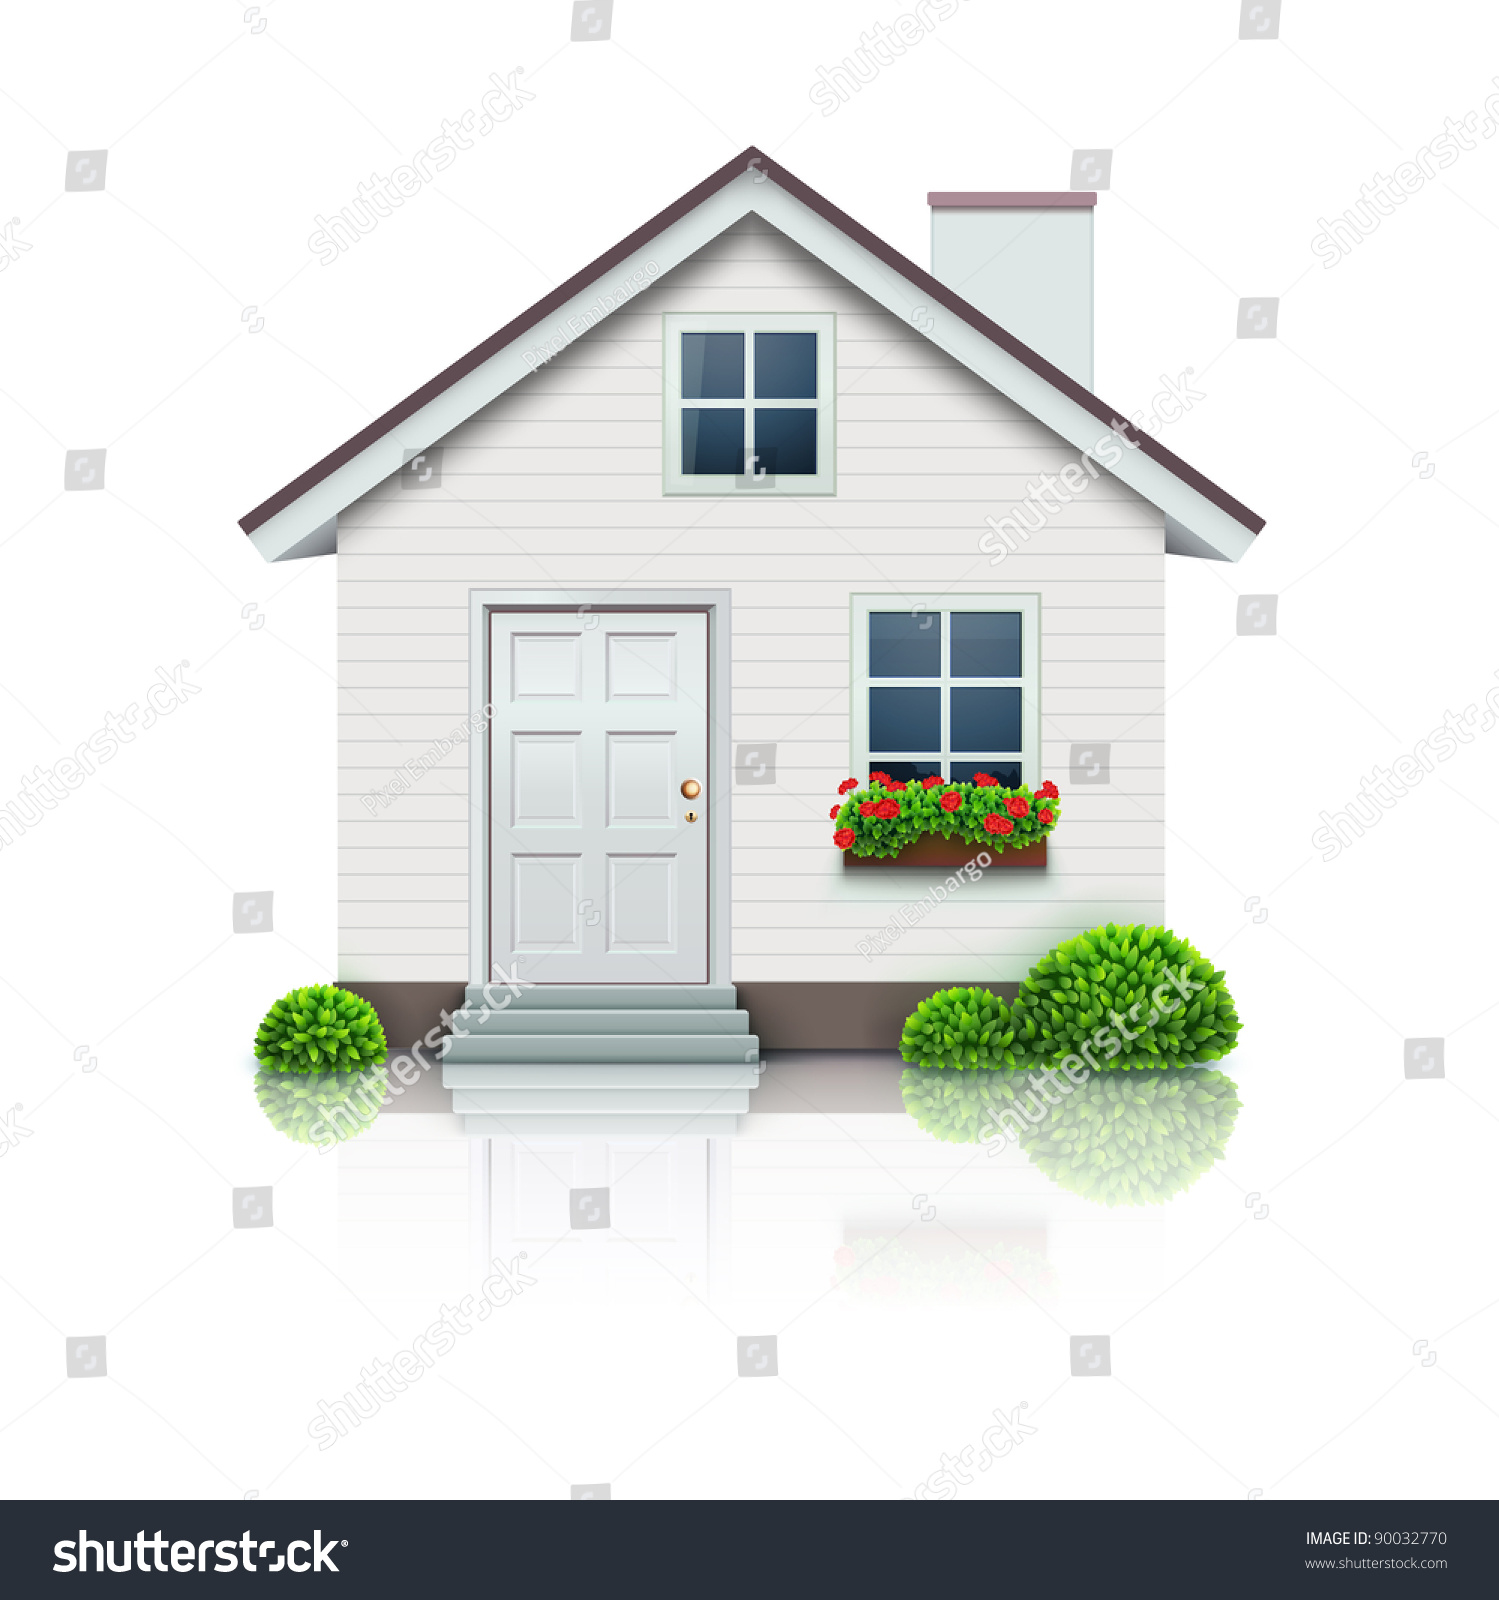 Vector illustration of cool detailed house icon isolated on white background. #90032770